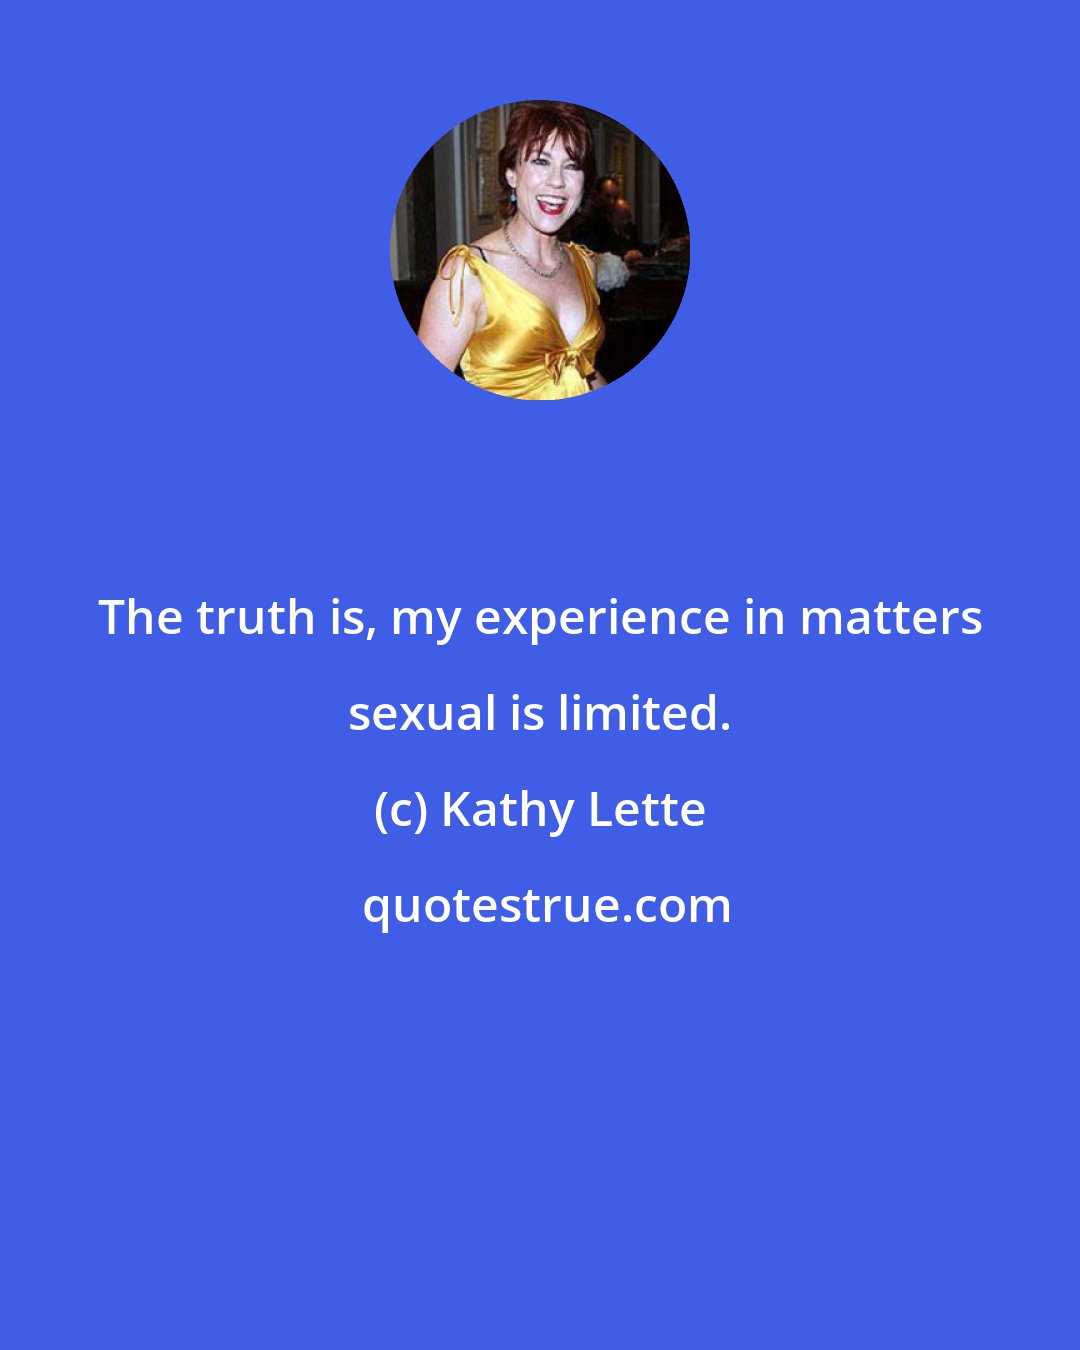 Kathy Lette: The truth is, my experience in matters sexual is limited.